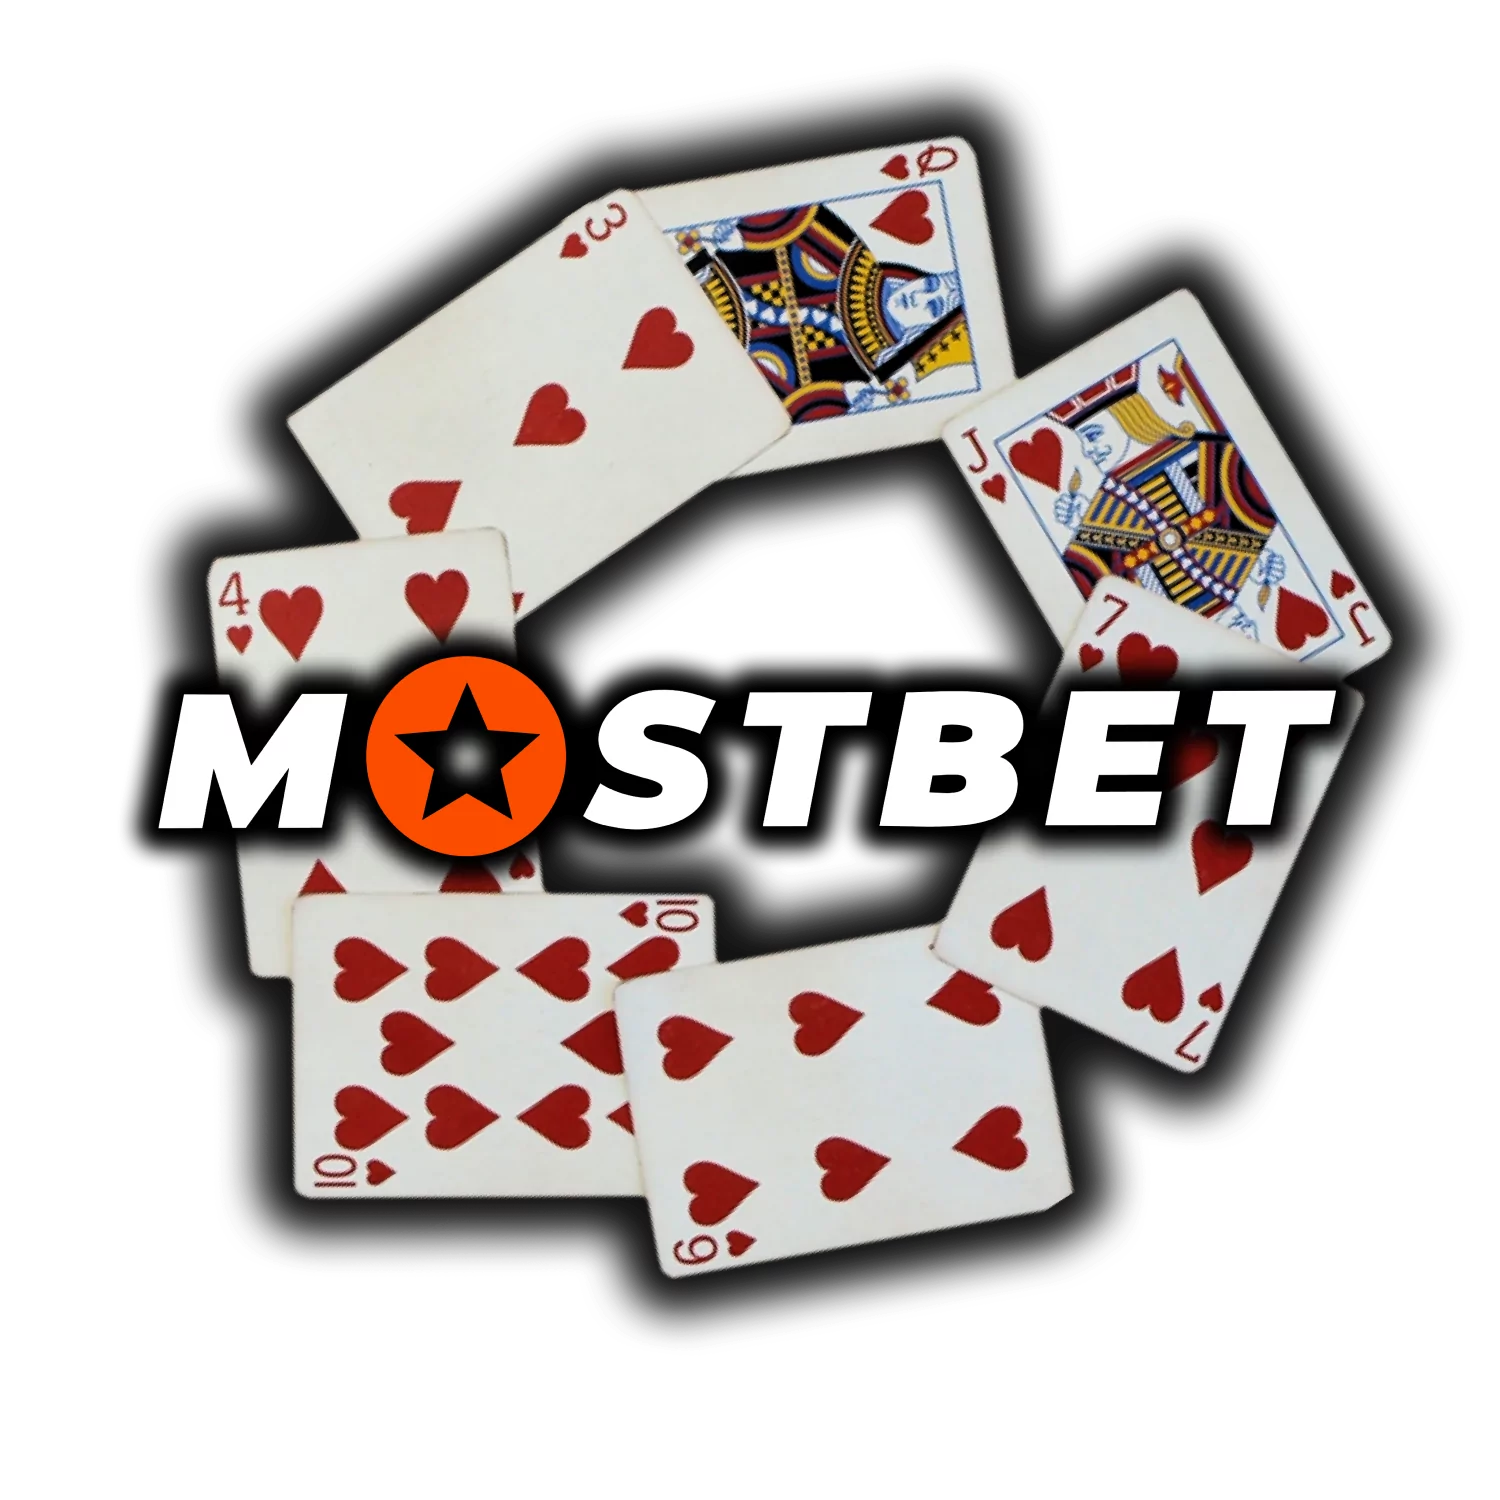 If you like card games, try baccarat at Mostbet.